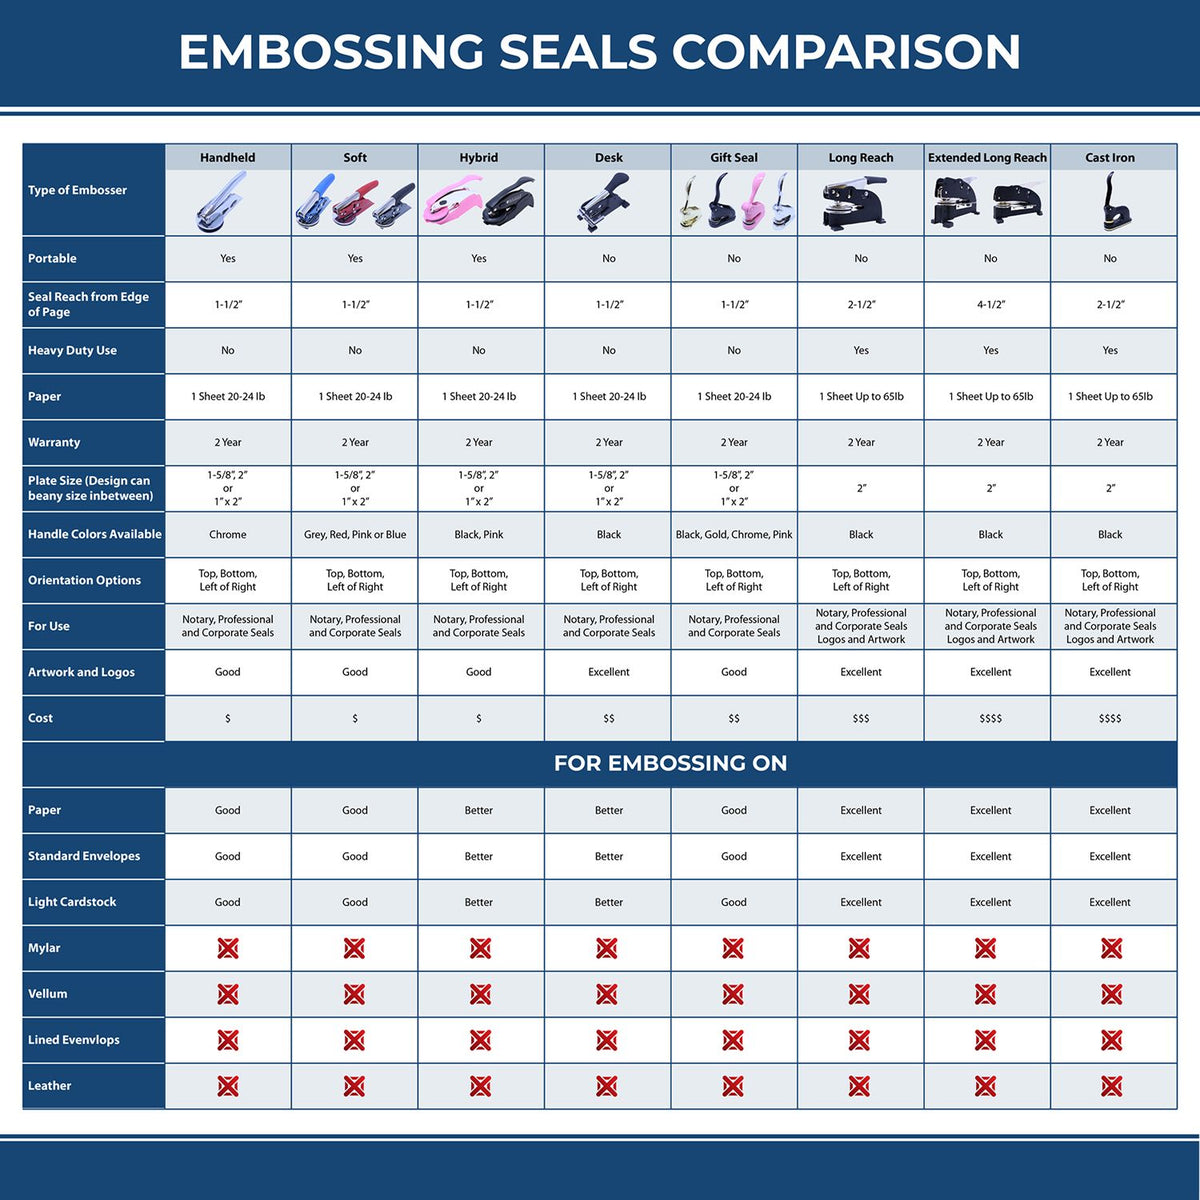 A comparison chart for the different types of mount models available for the Long Reach Virginia PE Seal.